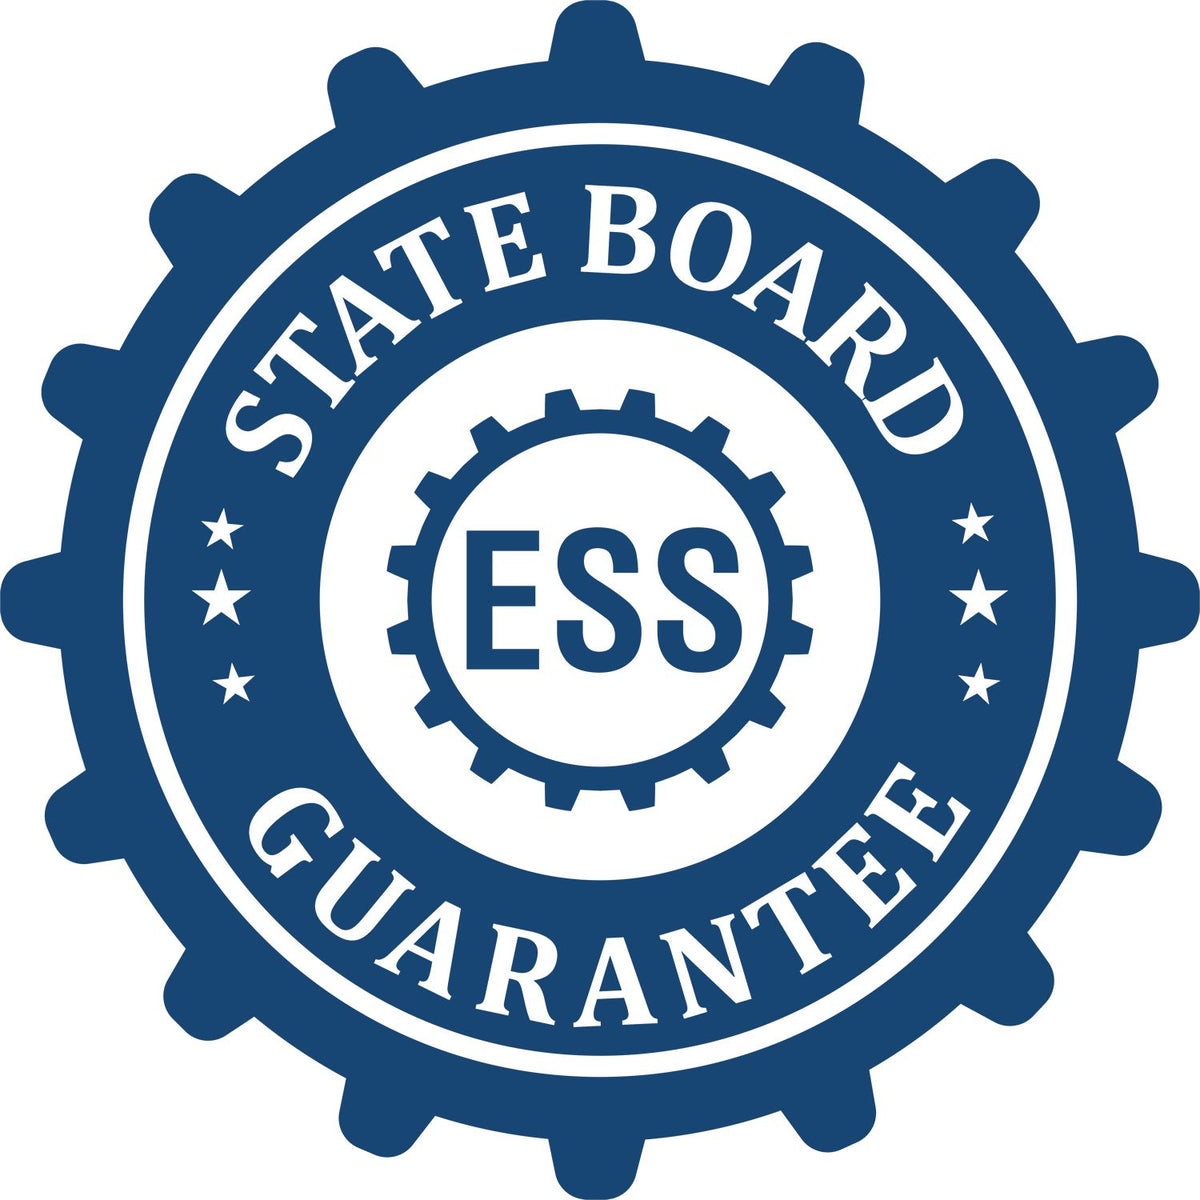 An emblem in a gear shape illustrating a state board guarantee for the Vermont Landscape Architectural Seal Stamp product.